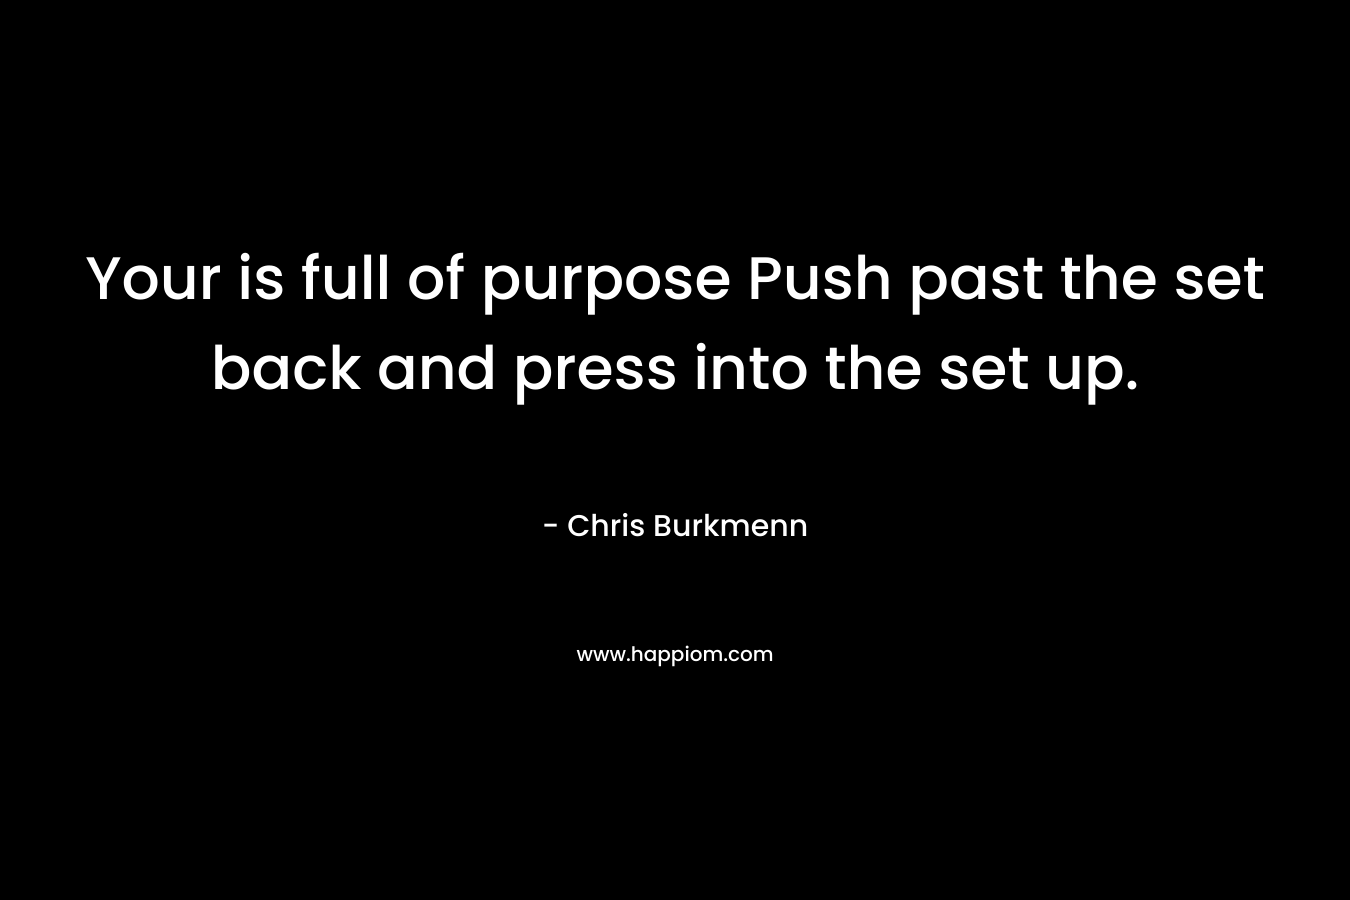 Your is full of purpose Push past the set back and press into the set up.